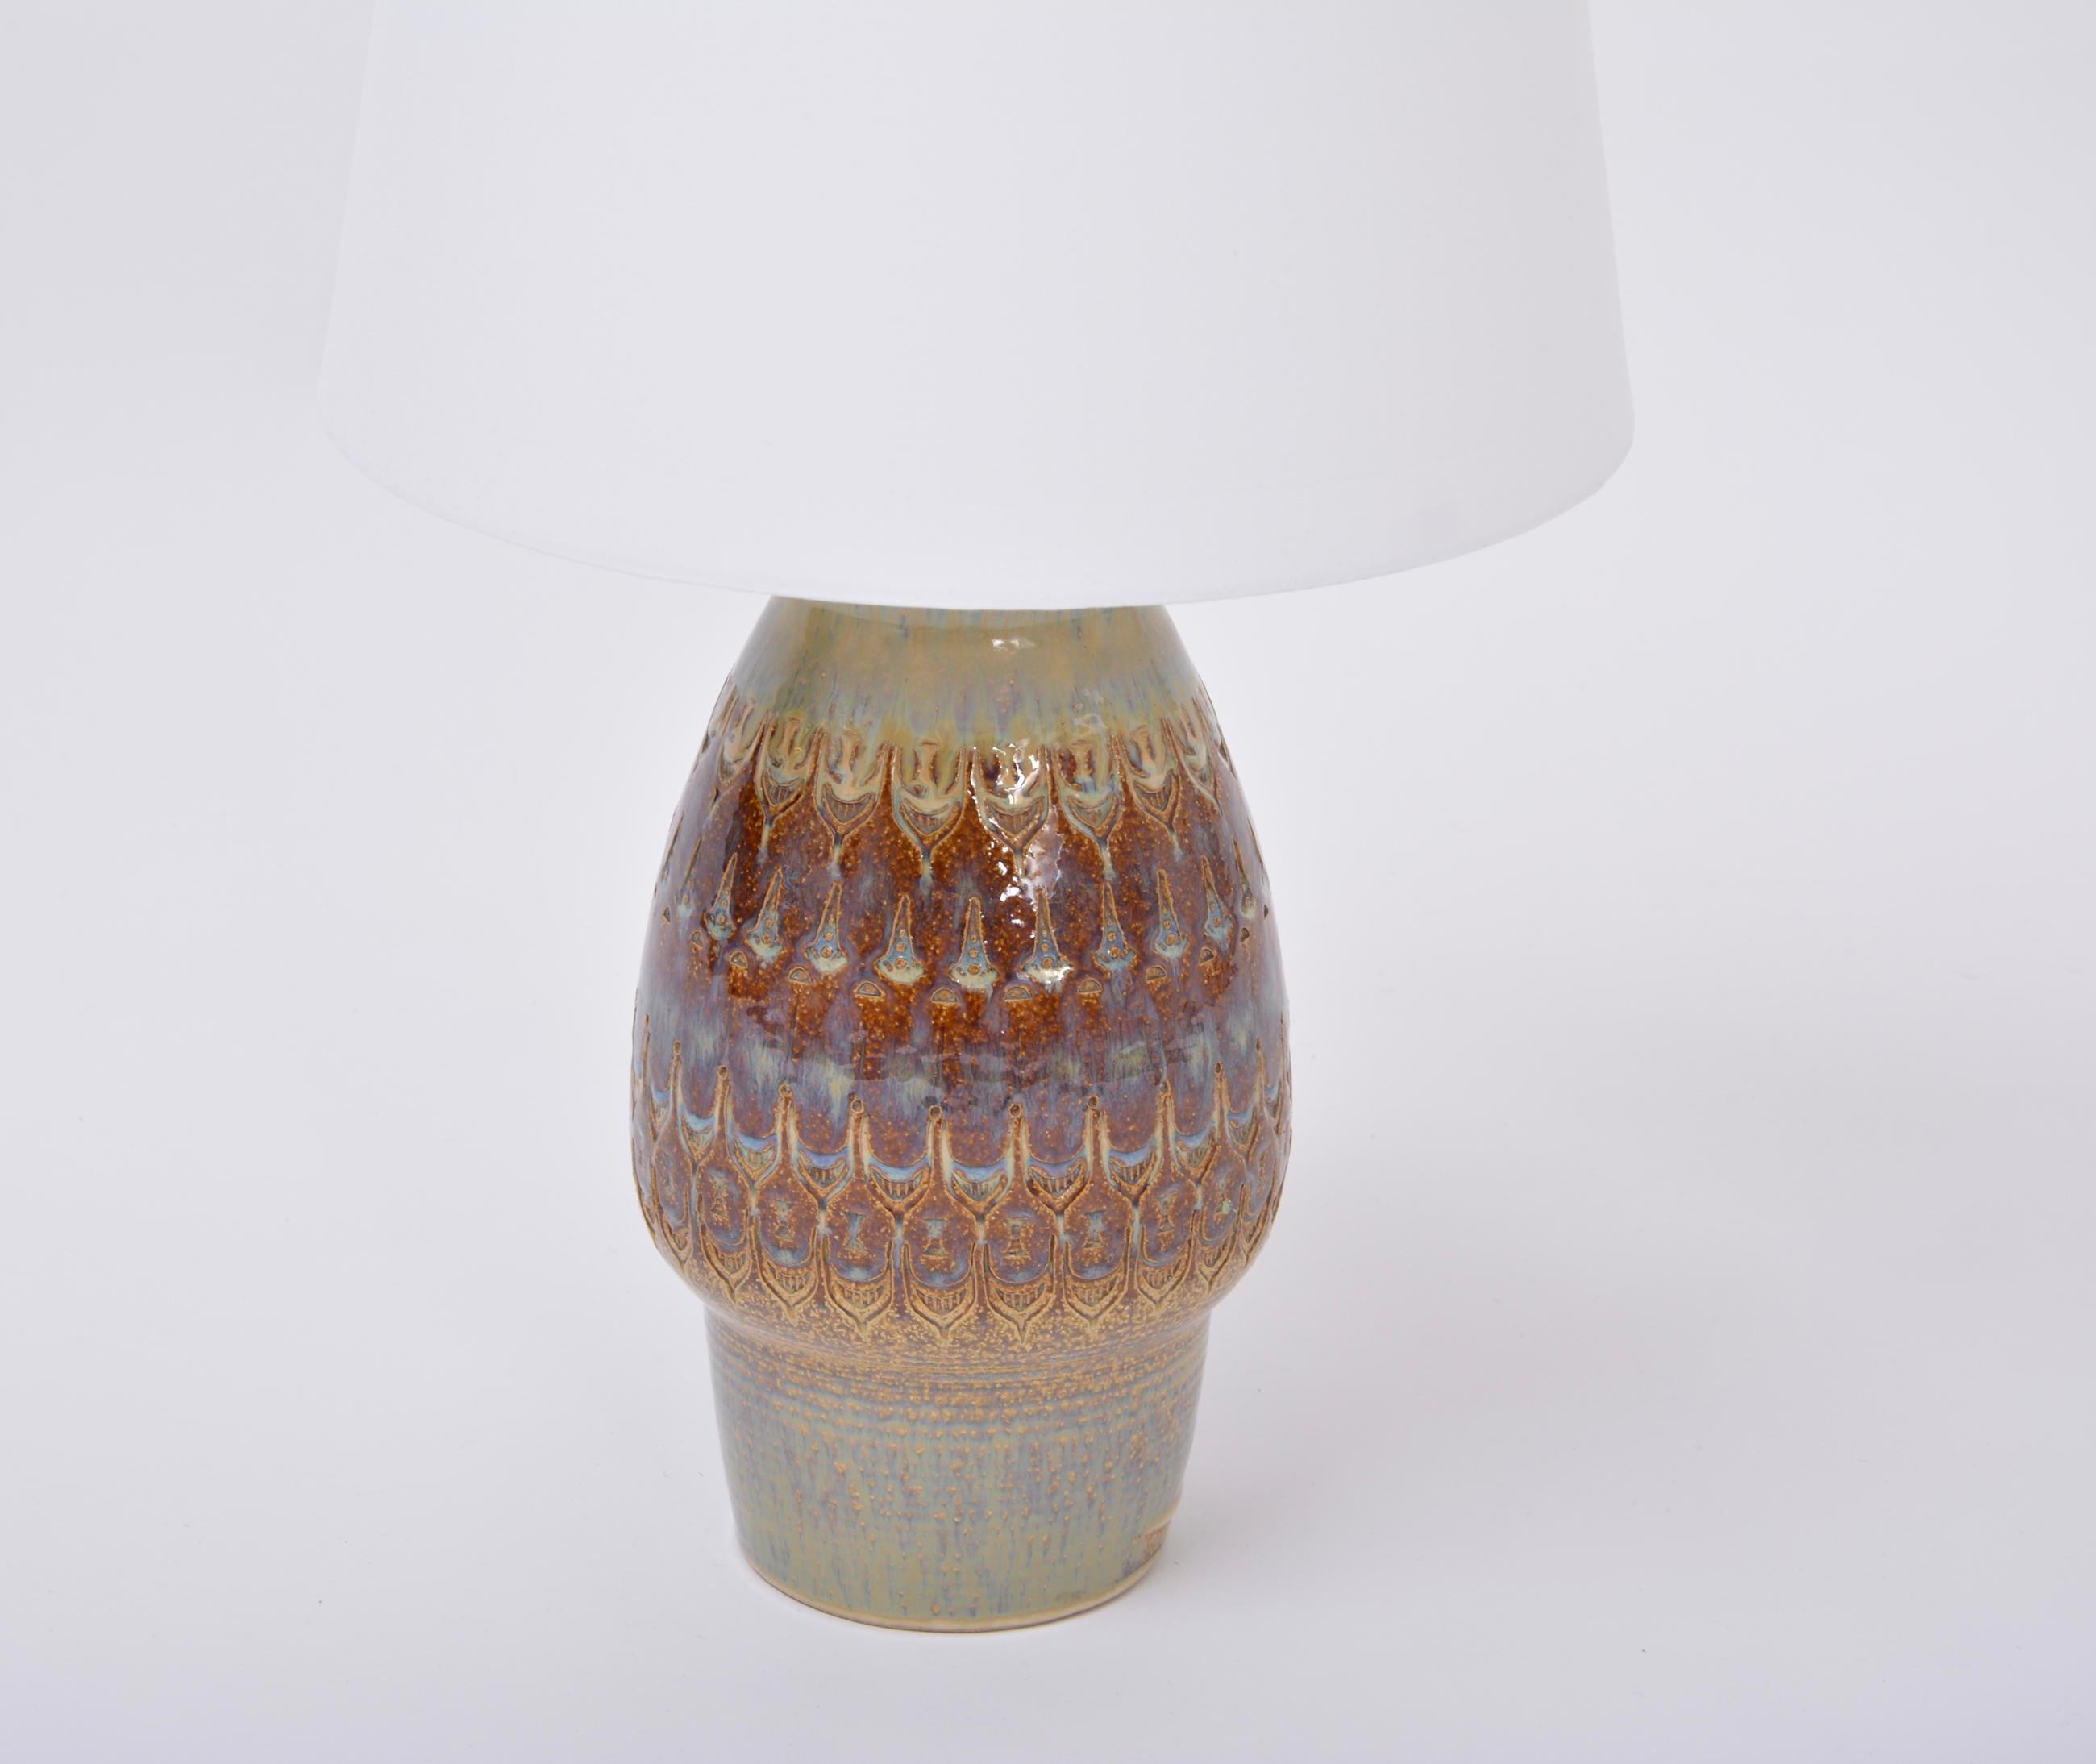 Brown handmade Mid-Century Modern Danish stoneware table lamp by Soholm Stentoj

Spectacular tall table lamp made of stoneware with ceramic glazing in various tones of brown. The base of the lamp features various graphic patterns. Handmade in